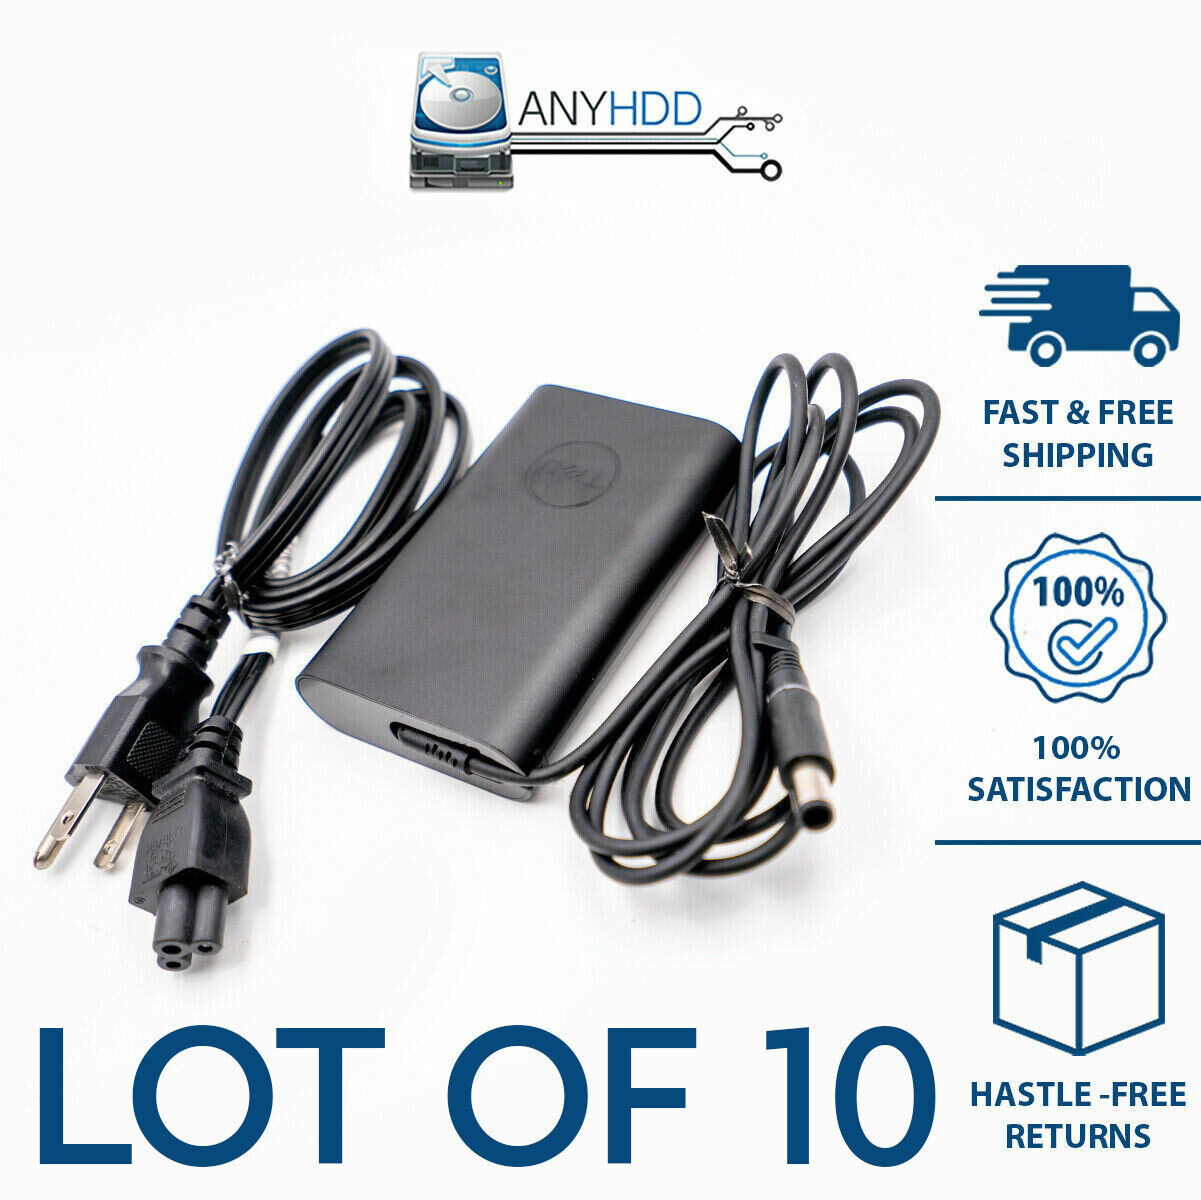 10x Genuine OEM Dell Laptop Charger AC Power Adapter Cord Inspiron 65W 19.5V Dell 492-BBOM, 332-1831, 06TFFF, 0JNKWD, 0G4X7T, 03F1CN